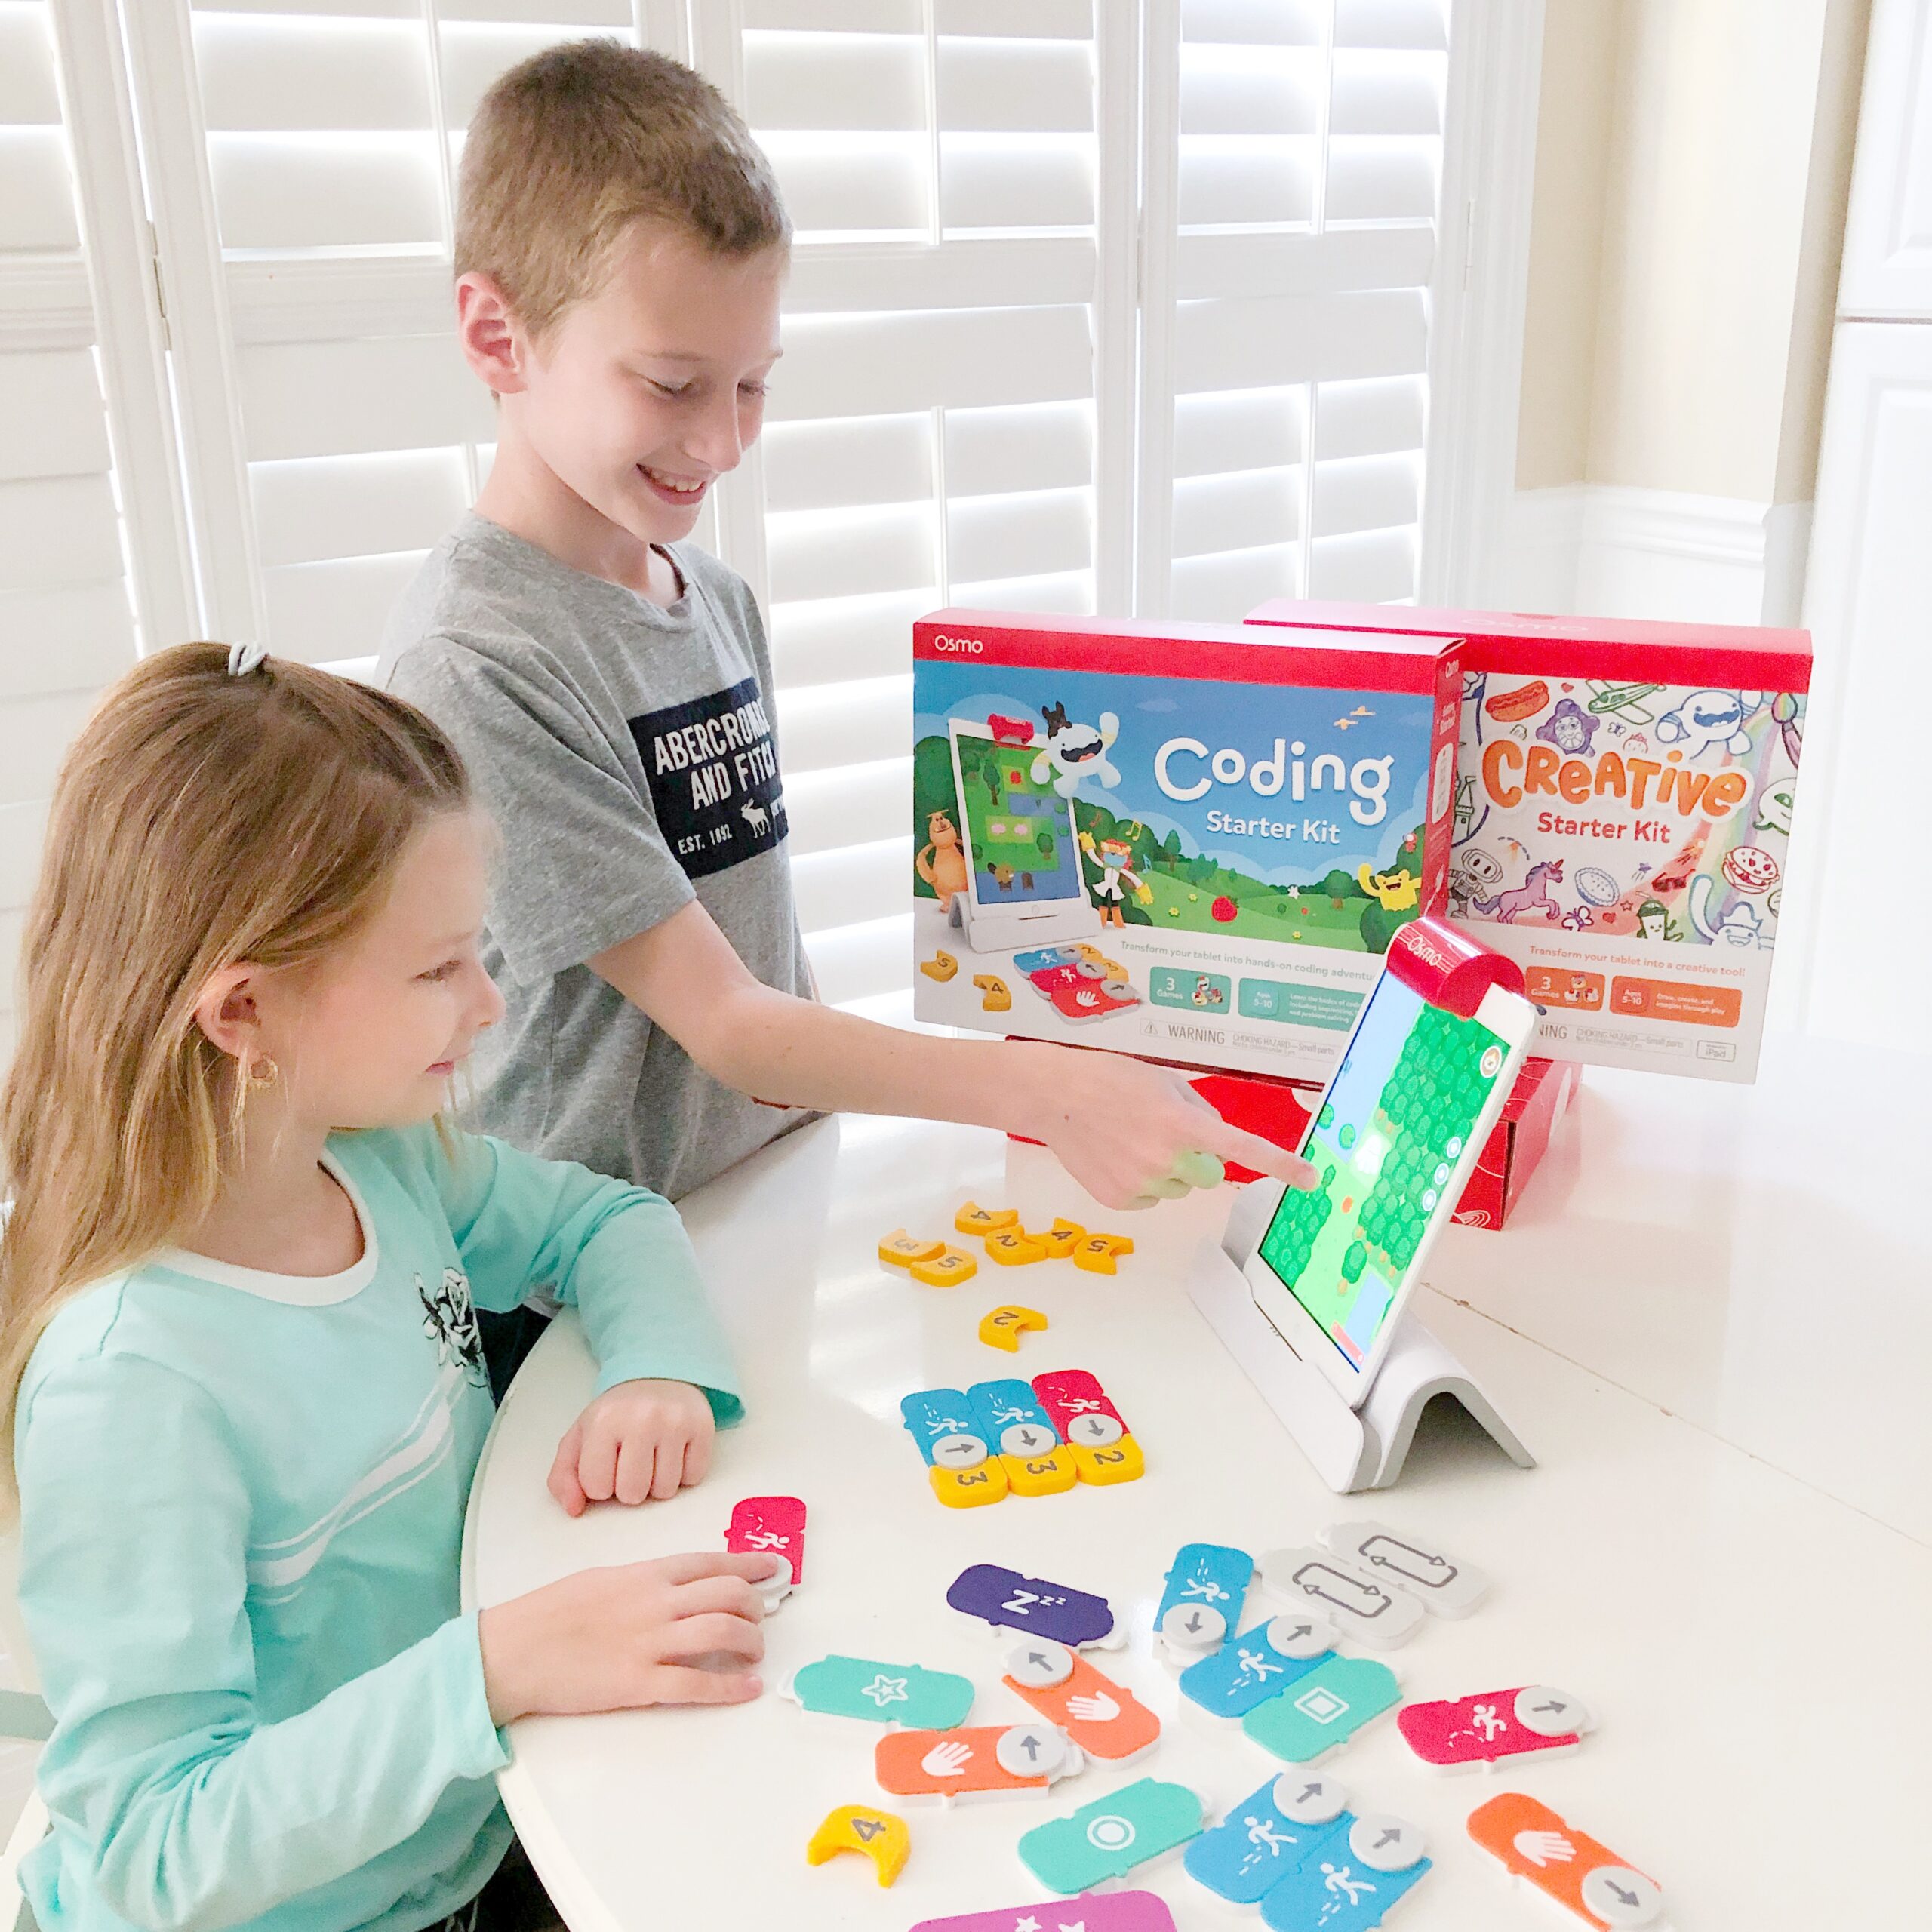 Review on the Osmo Coding Start Kit, and the Monster Creative Kit on Livin' Life with Style 